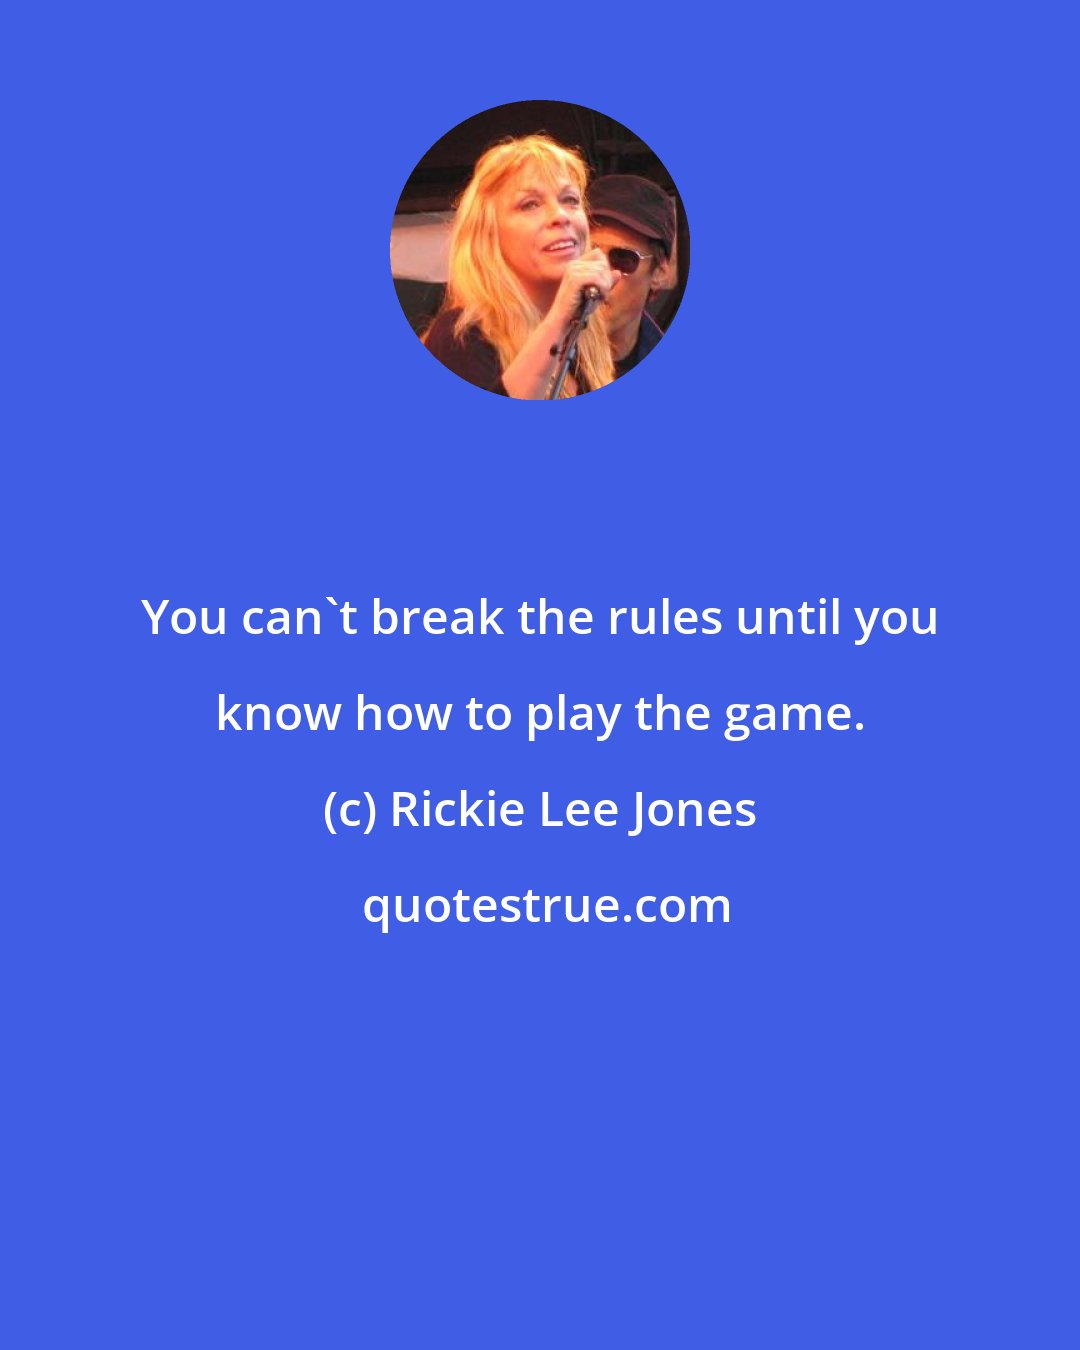 Rickie Lee Jones: You can't break the rules until you know how to play the game.